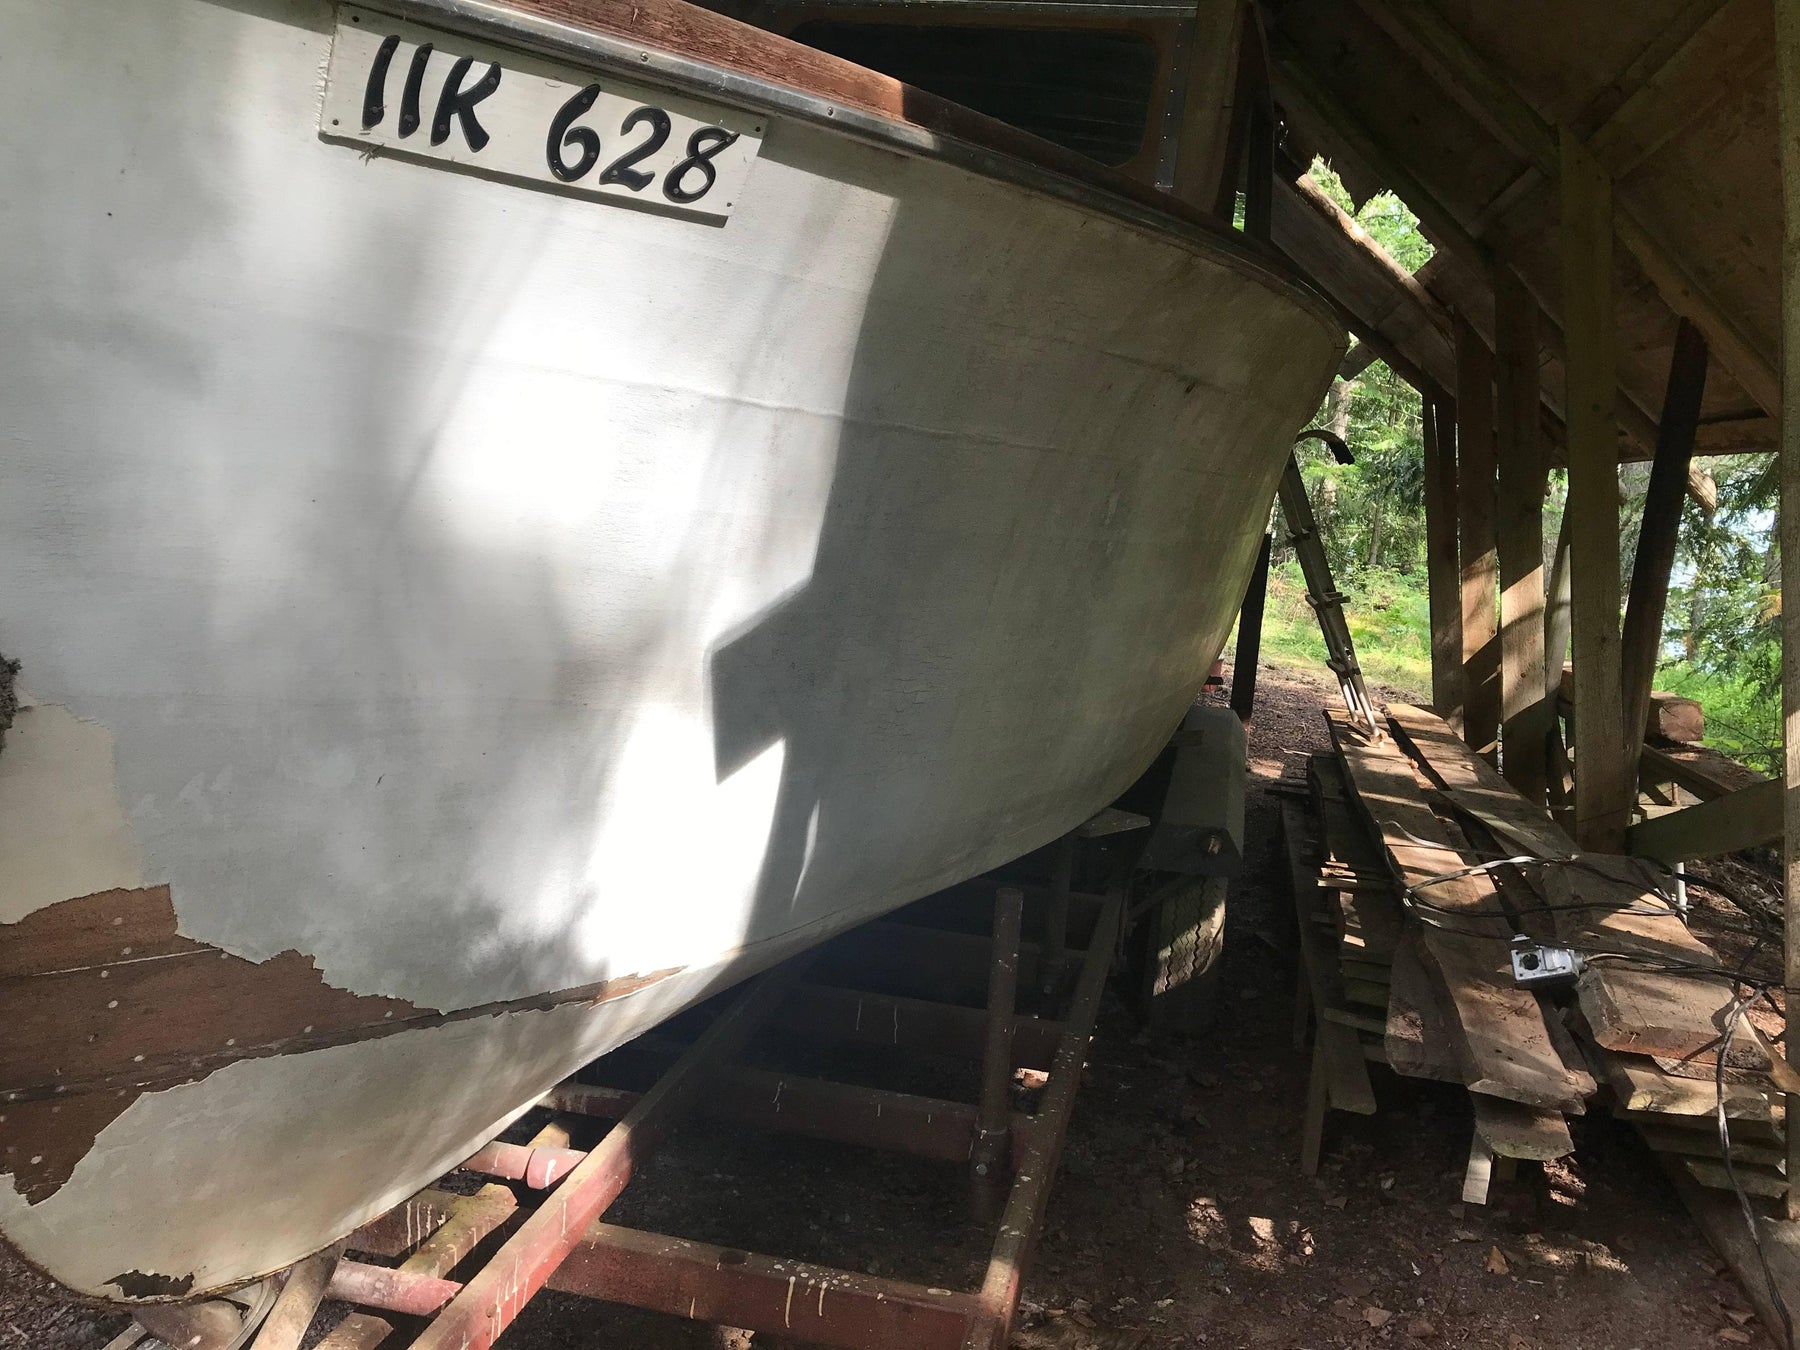 Classic Wooden Boat for Sale -  1941 CHRIS-CRAFT 26' DELUXE CRUISER